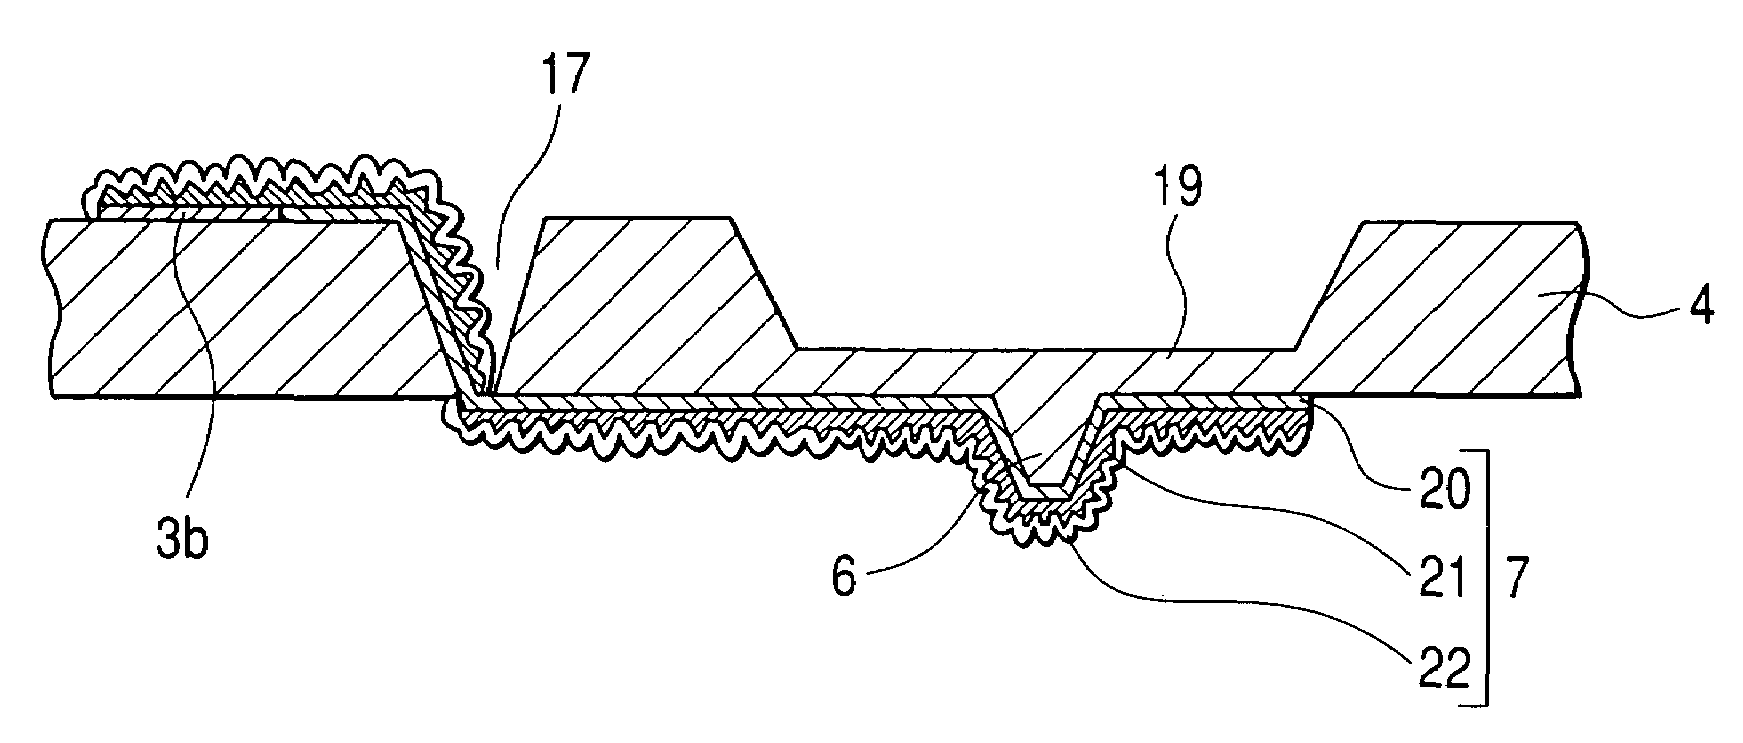 Method of manufacturing a semiconductor device including defect inspection using a semiconductor testing probe